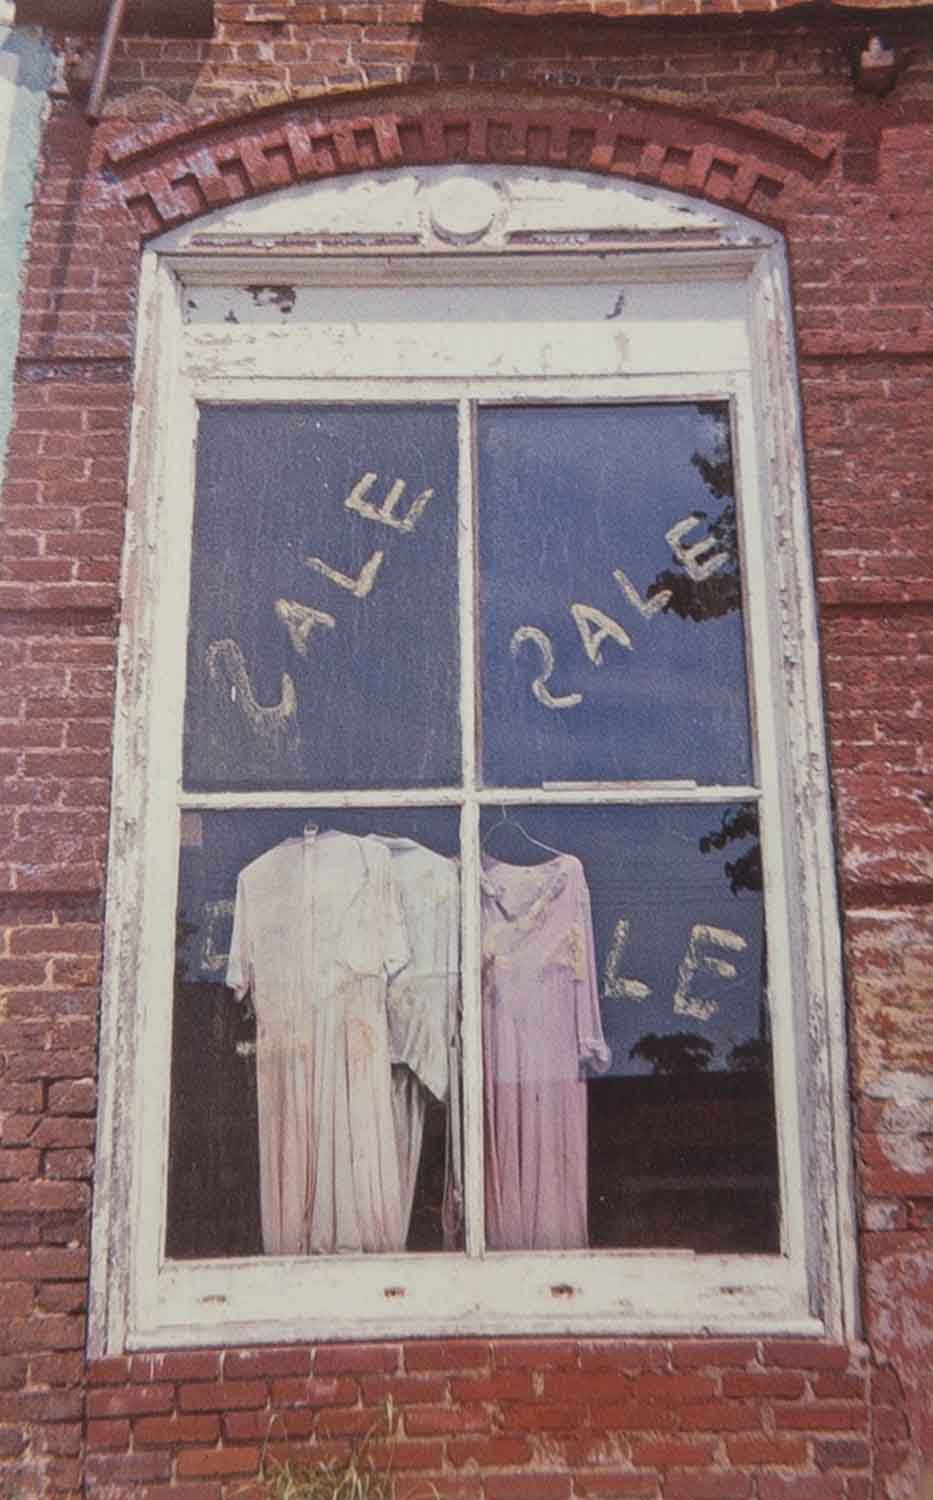   Window with Sale Dresses, Uniontown, Alabama  Image: 1974/printed: 1981 Dye Coupler Color Print 5 x 3 1/4 in. (image size) The Do Good Fund, Inc., 2016-119 